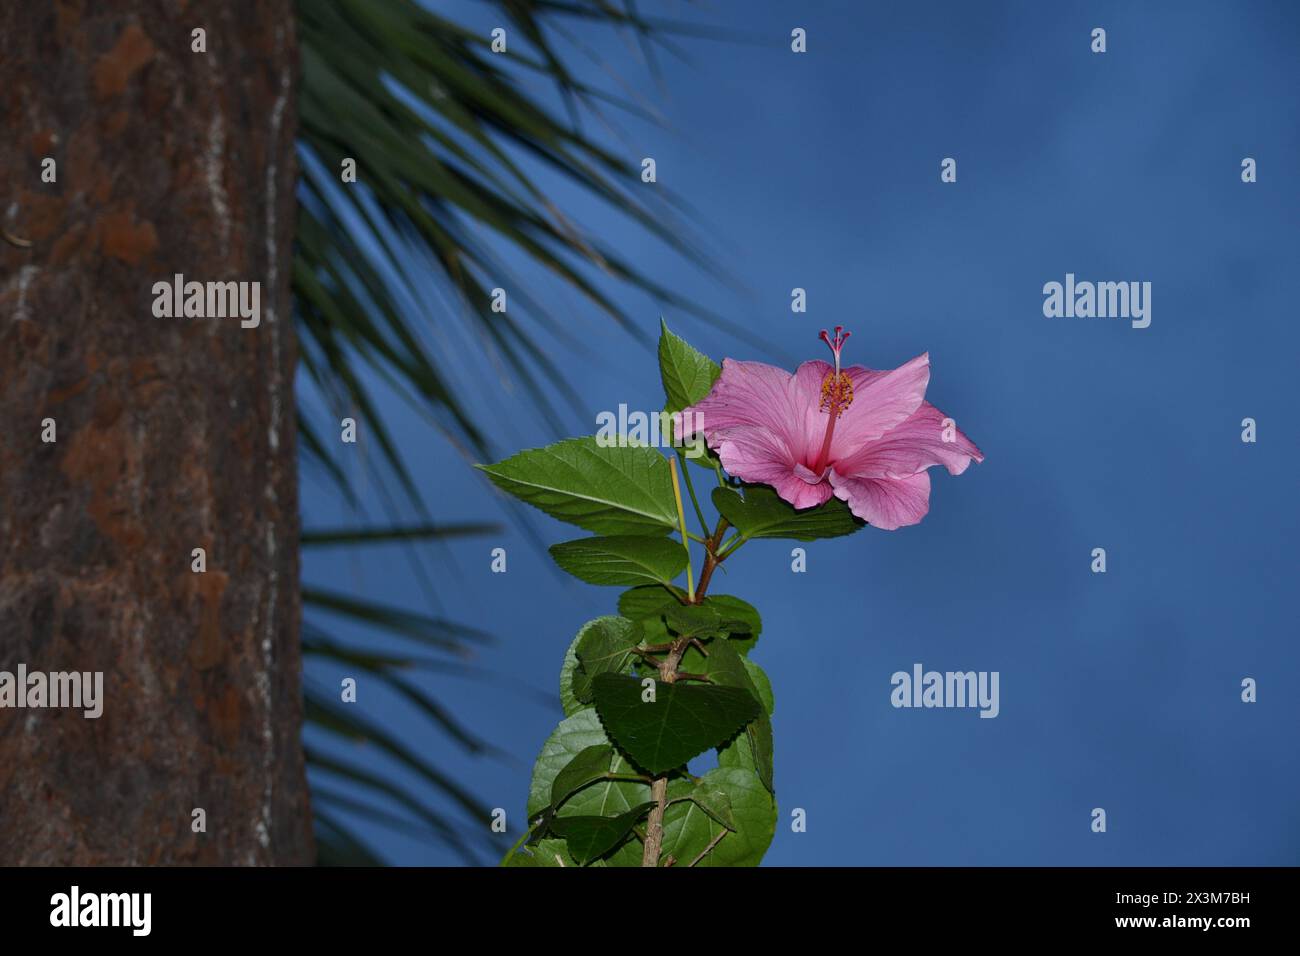 A close-up view of a pink hibiscus flower contrasts with the blue hues of the evening sky, while pine and palm trees form a serene backdrop. Stock Photo